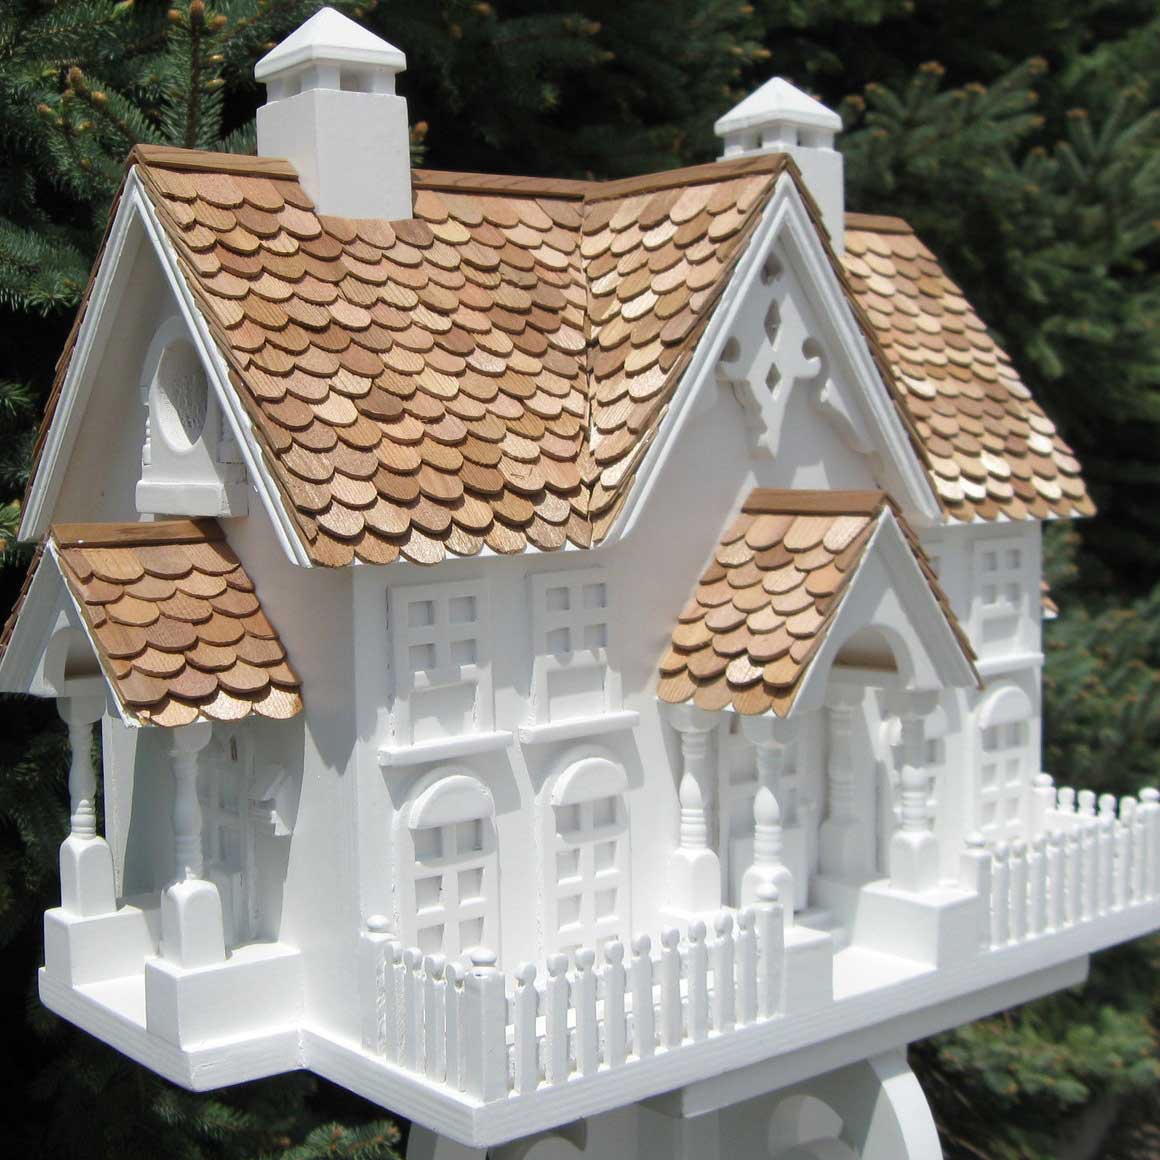 Woodworking ornate bird house plans PDF Free Download